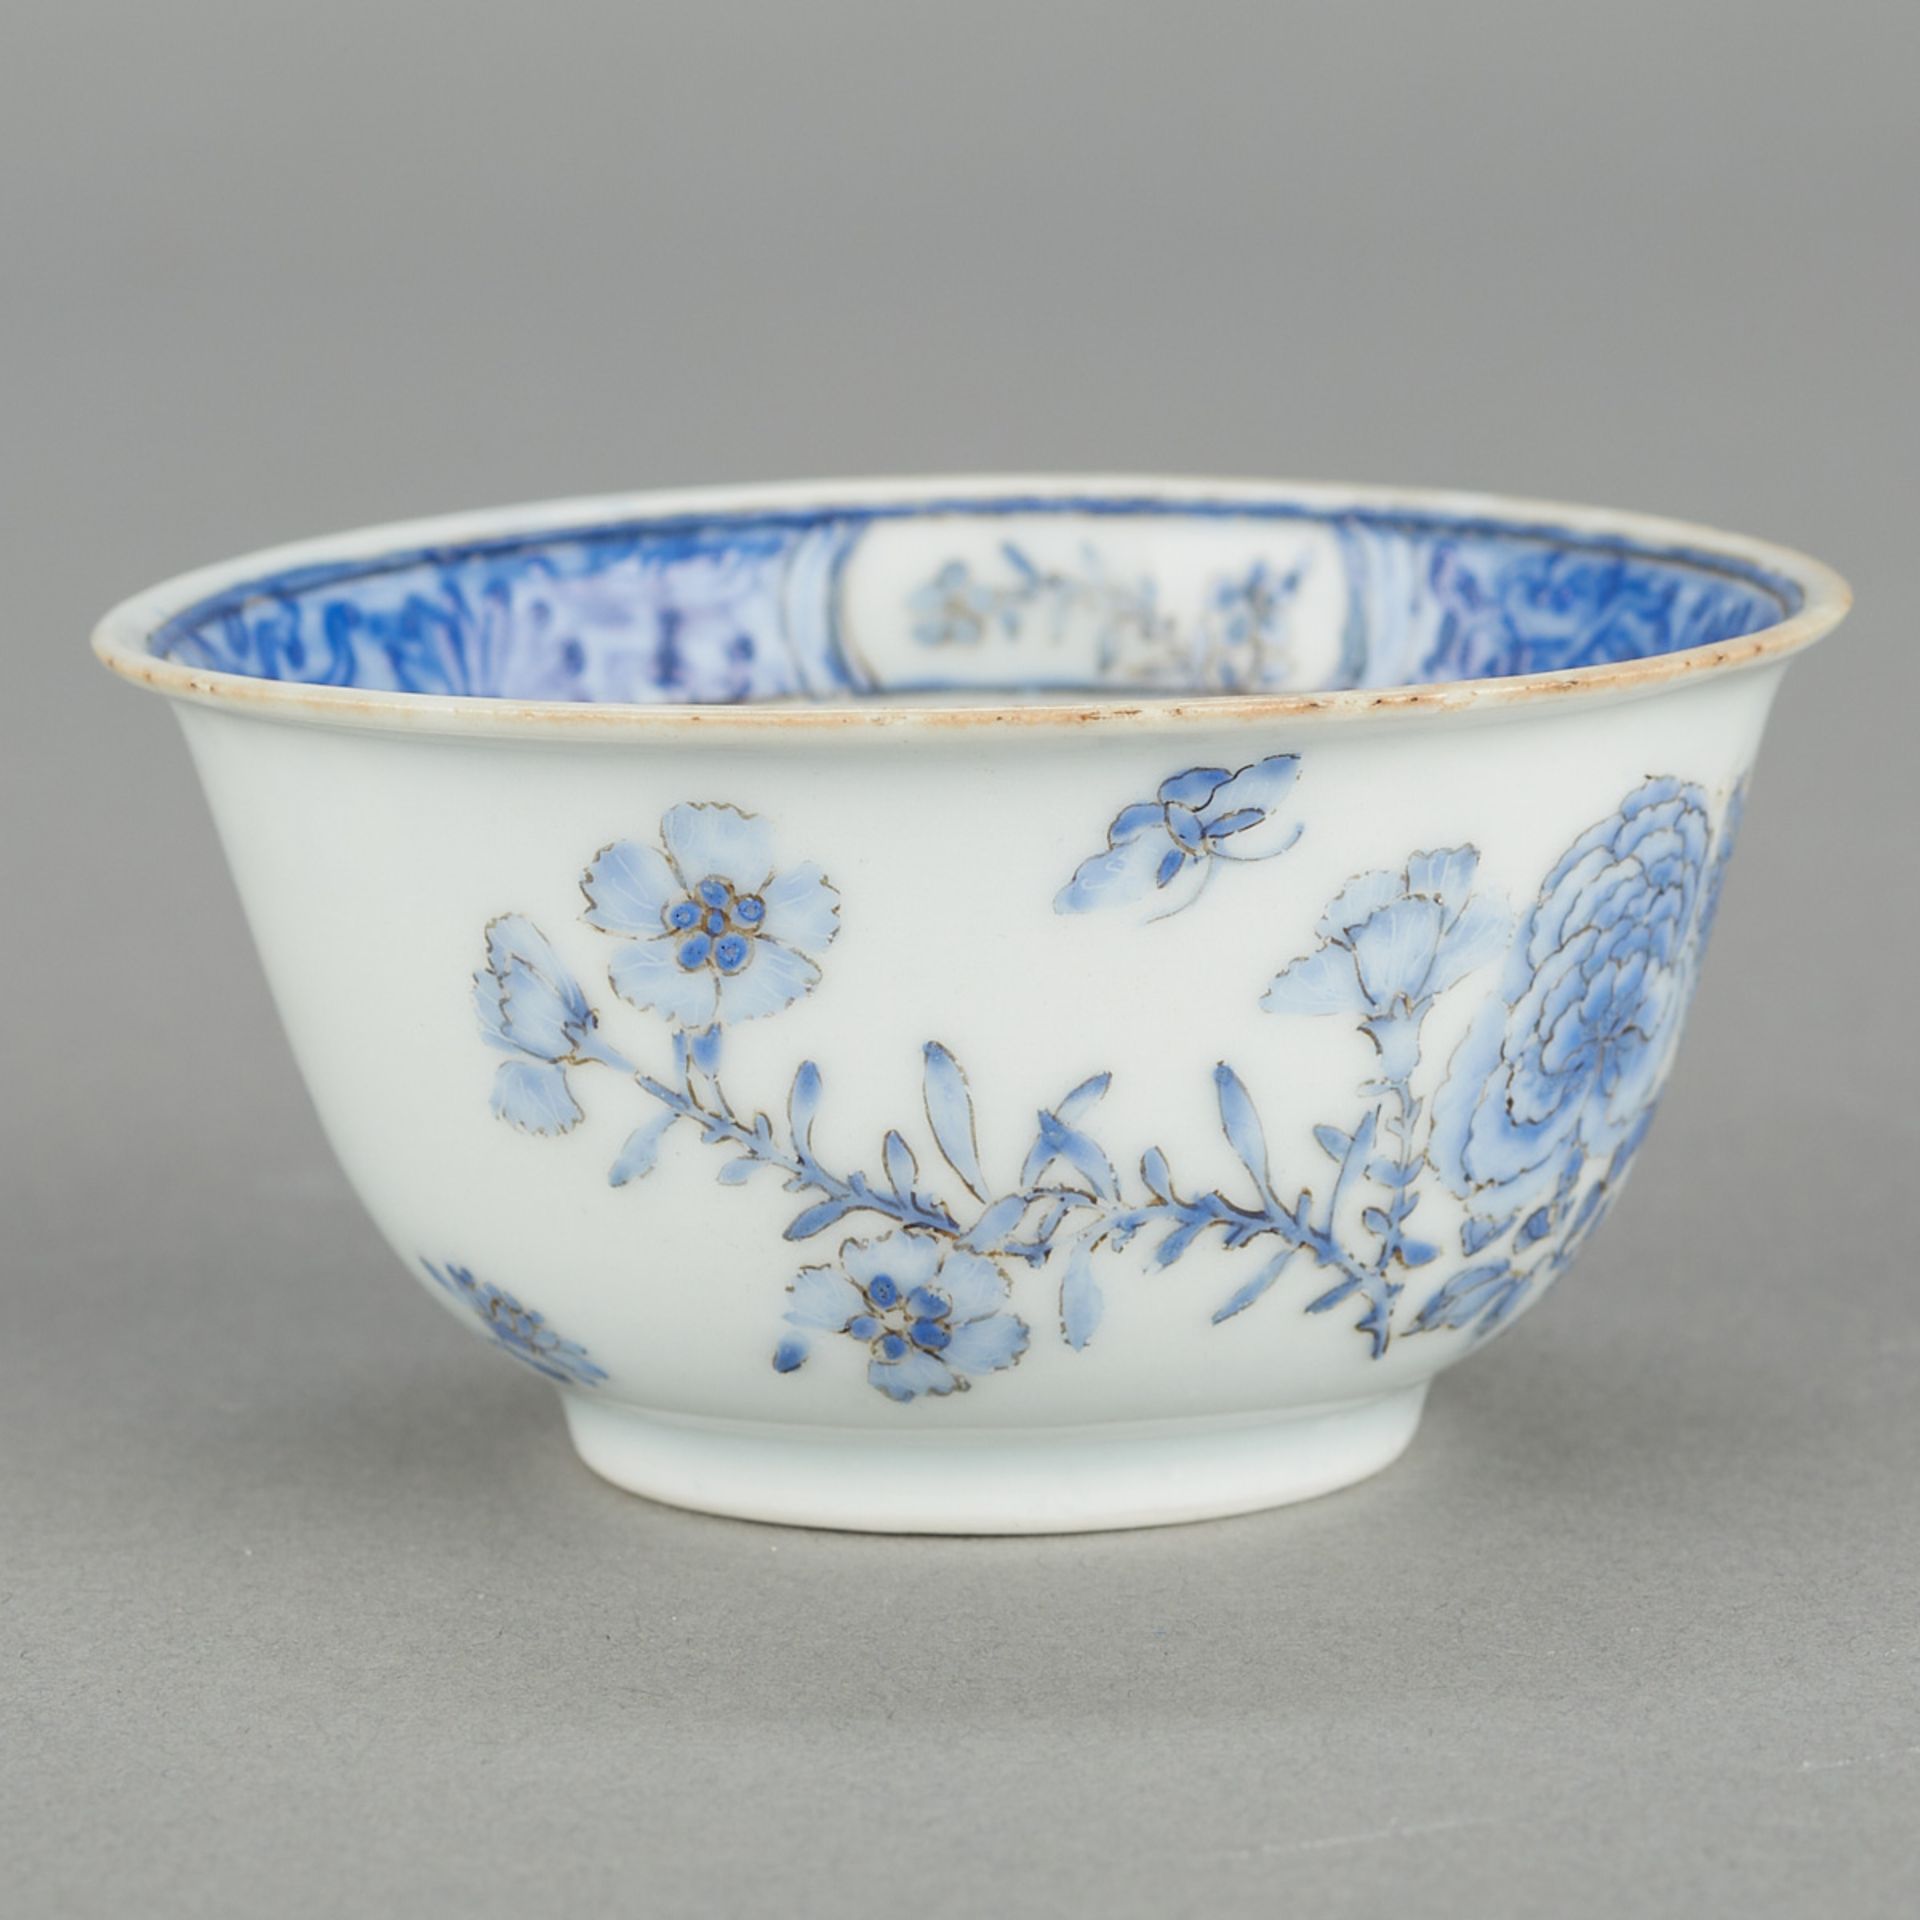 18th c. Chinese Porcelain Tea Bowl - Image 6 of 8